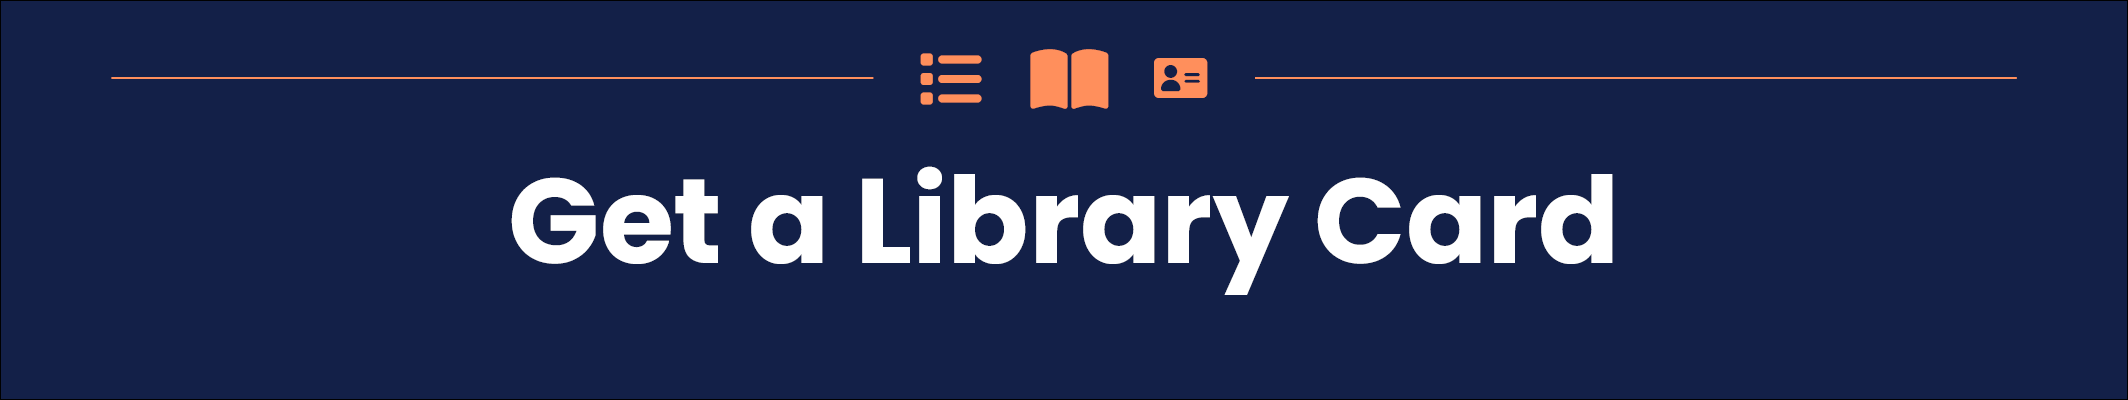 Get A Library Card